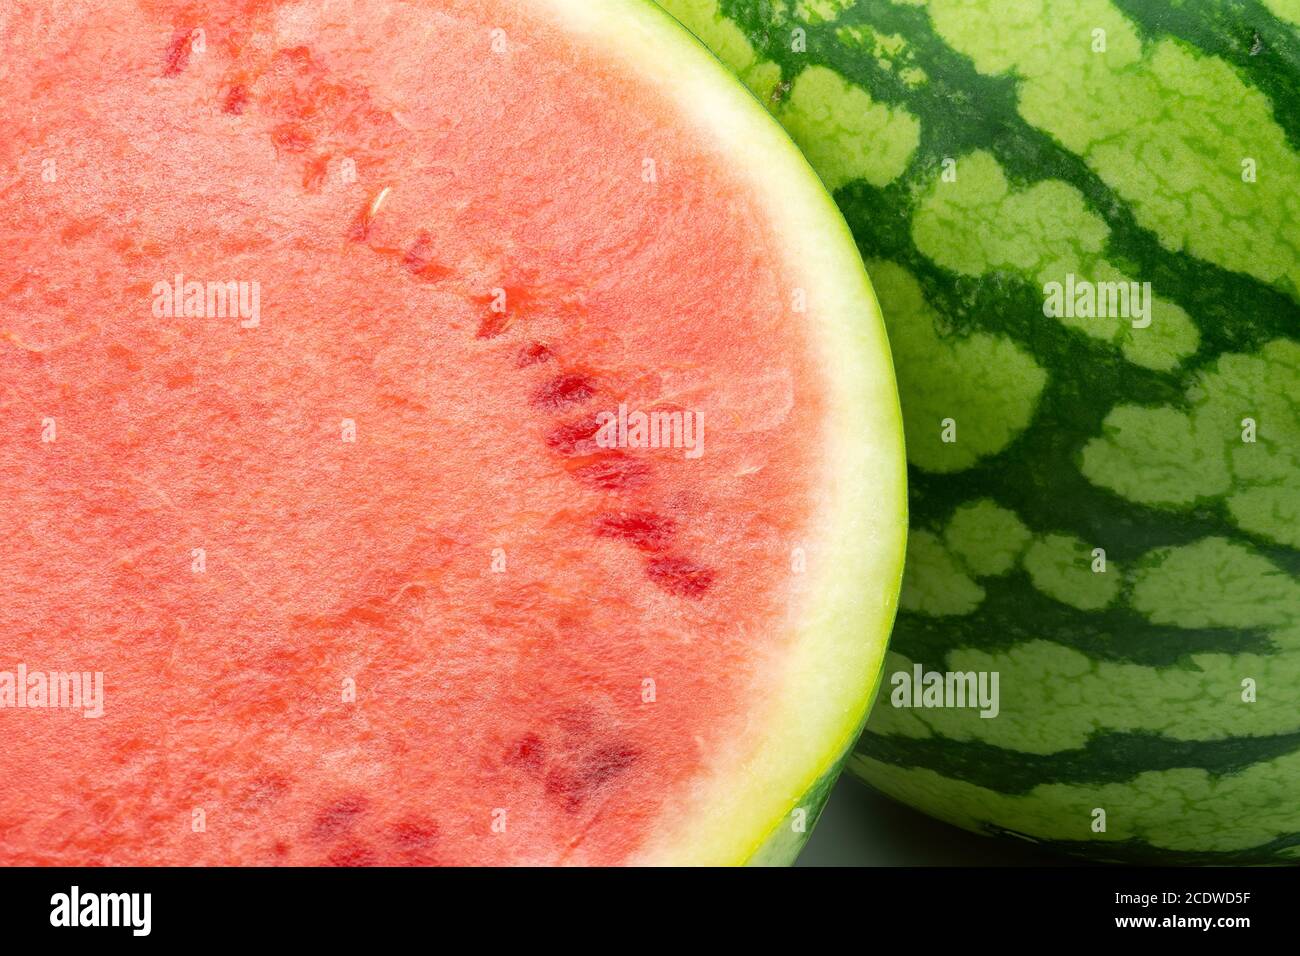 Watermelon close-up whole and half background. Stock Photo